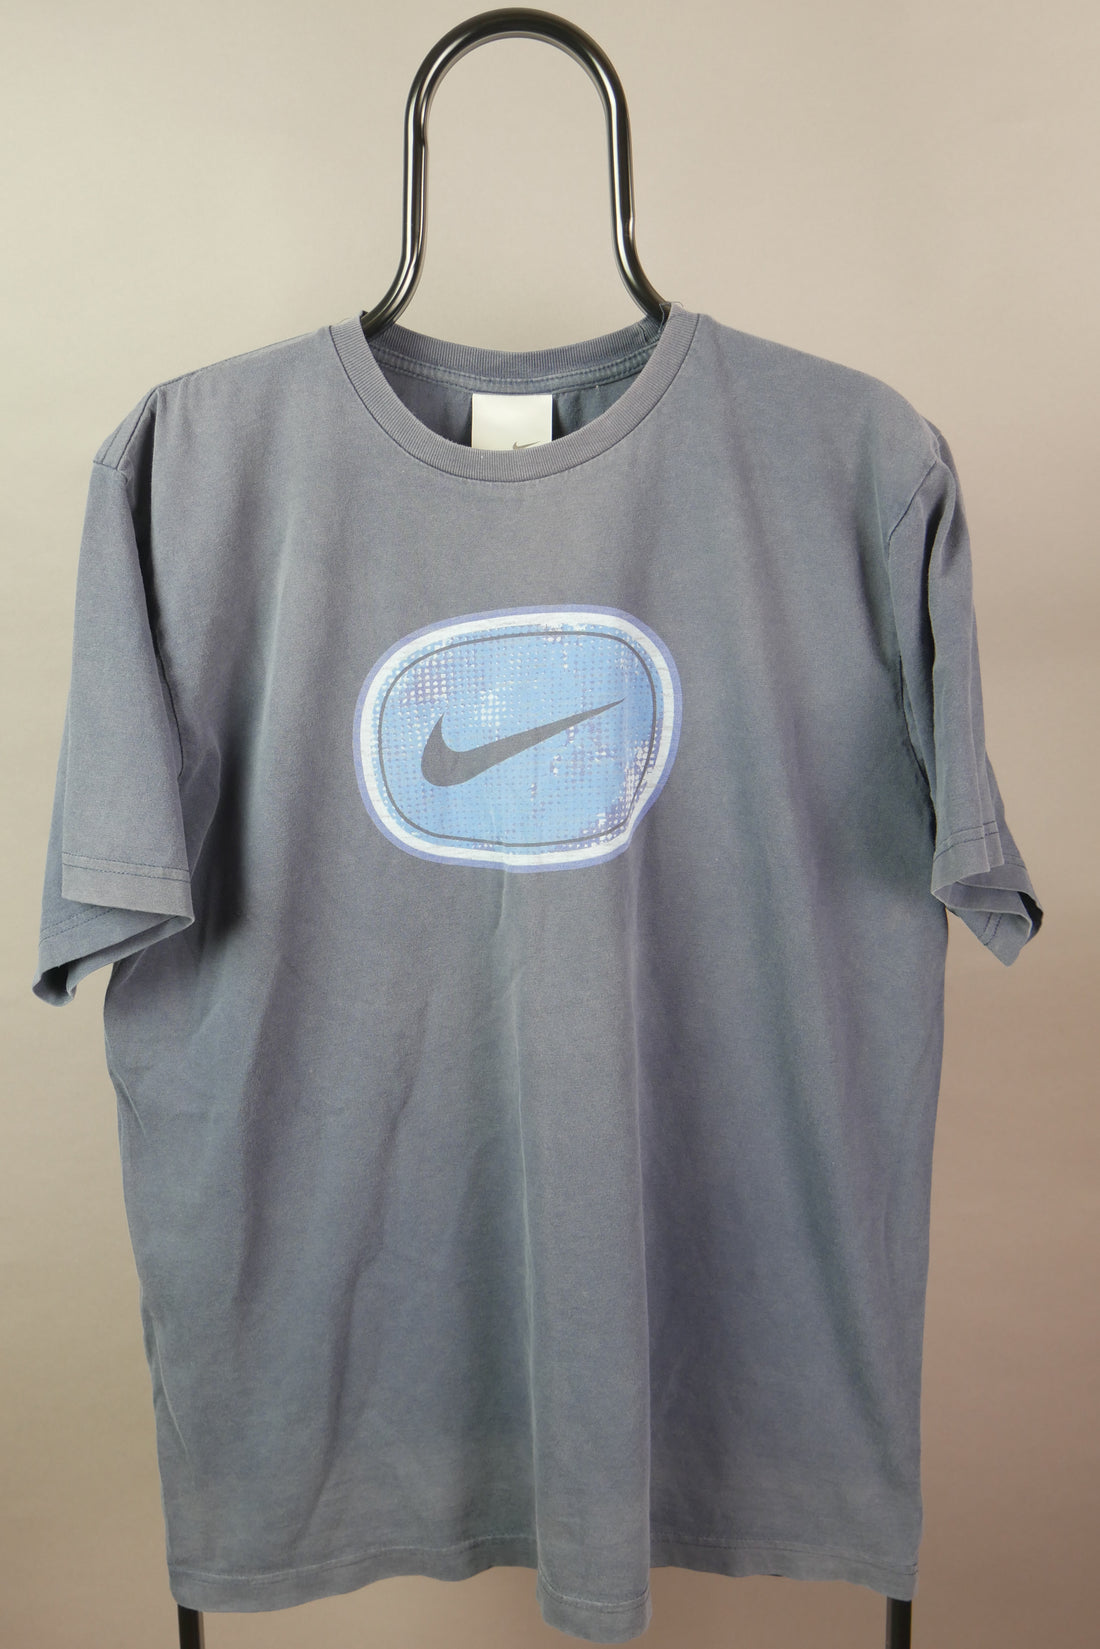 The Nike Graphic T-Shirt (L)